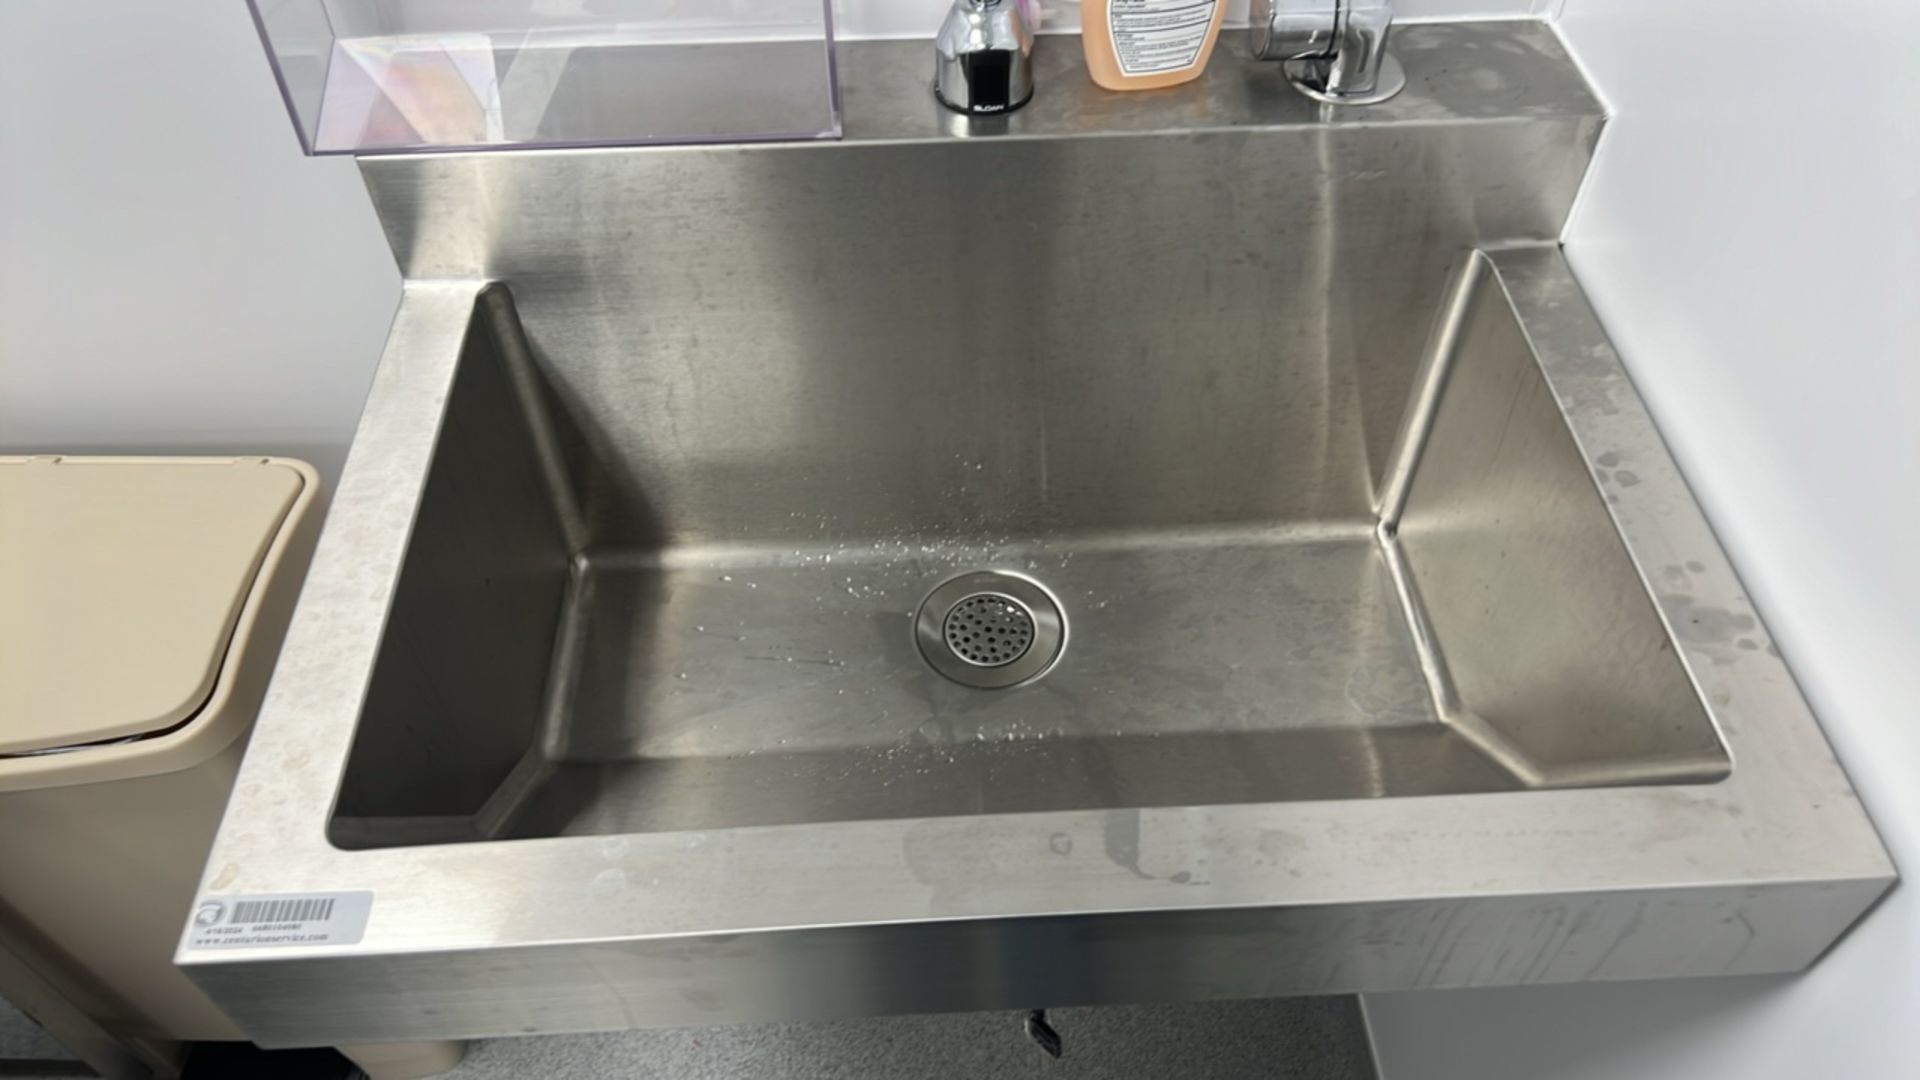 STAINLESS STEEL TOUCHLESS SINK WITH EYE WASH - Image 3 of 4